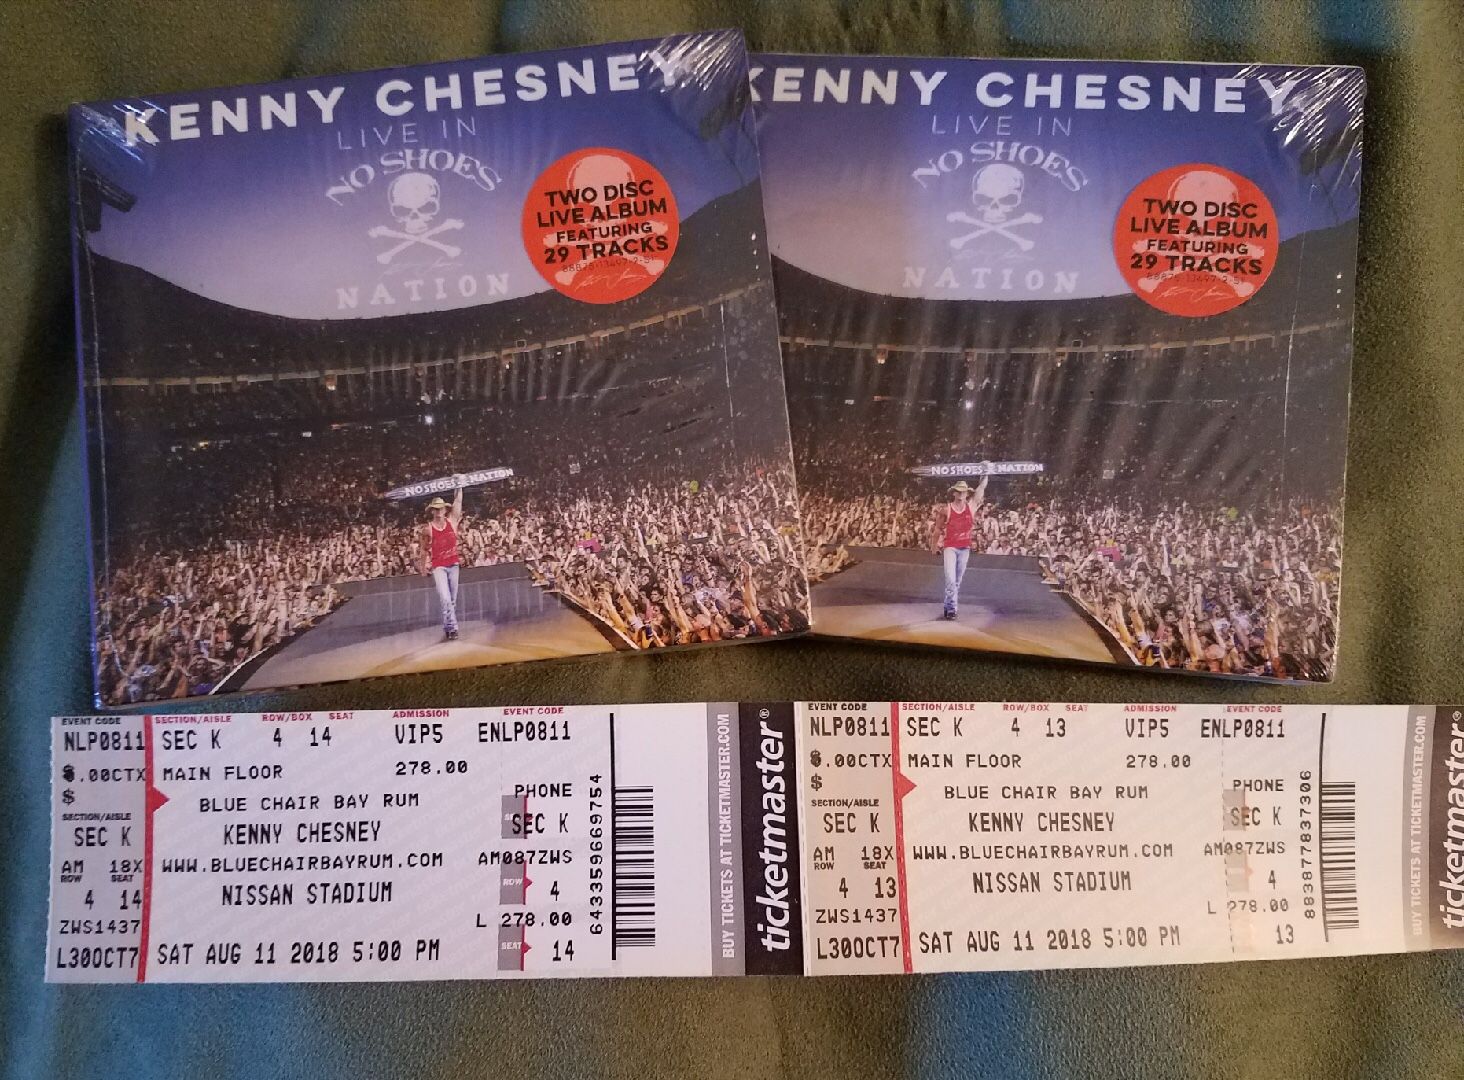 Kenny Chesney concert tickets